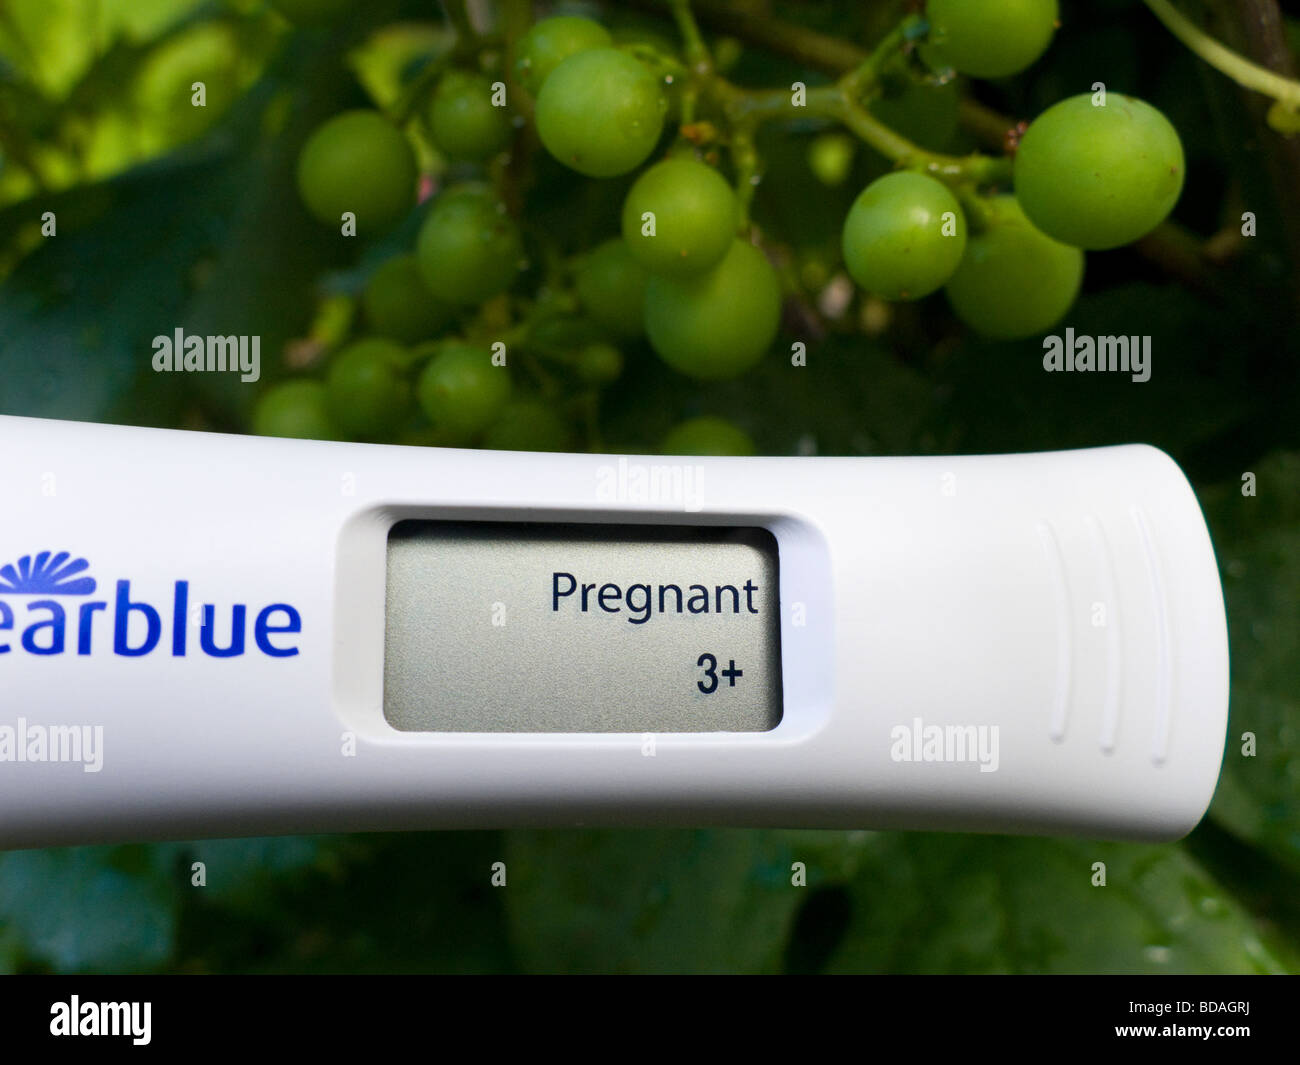 A pregnancy test device showing a positive pregnant result on the LCD display. (47) Stock Photo